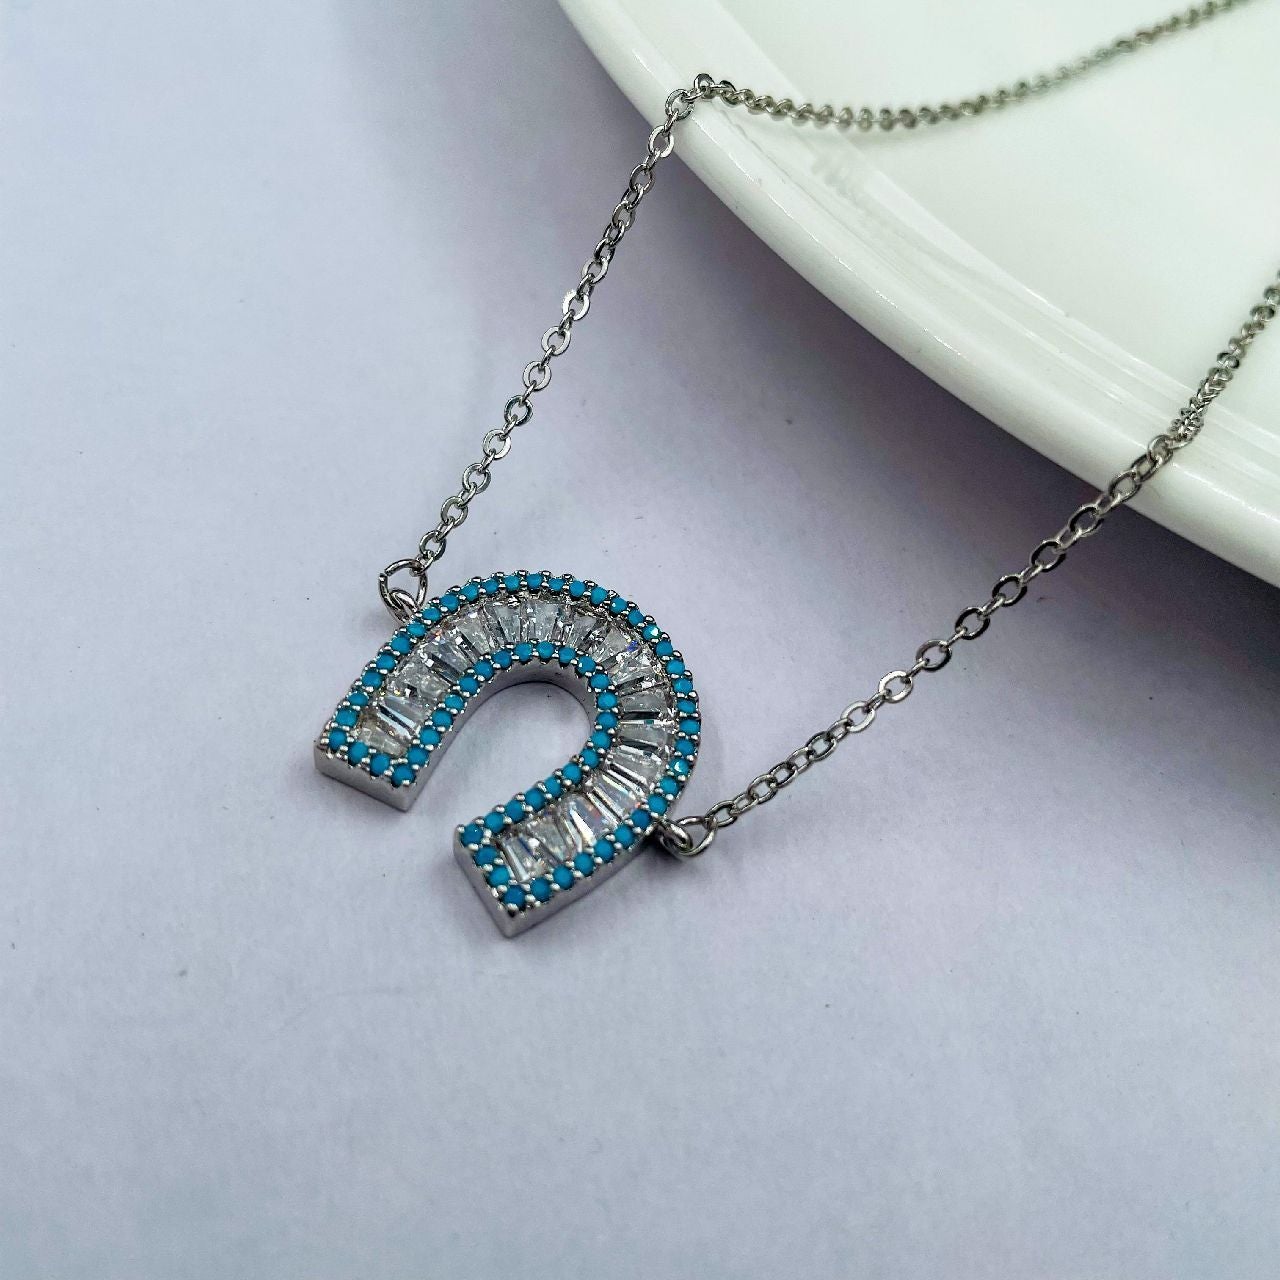 Copper Blue White Silver Stylish Necklace Pendant Chain For Women Girls